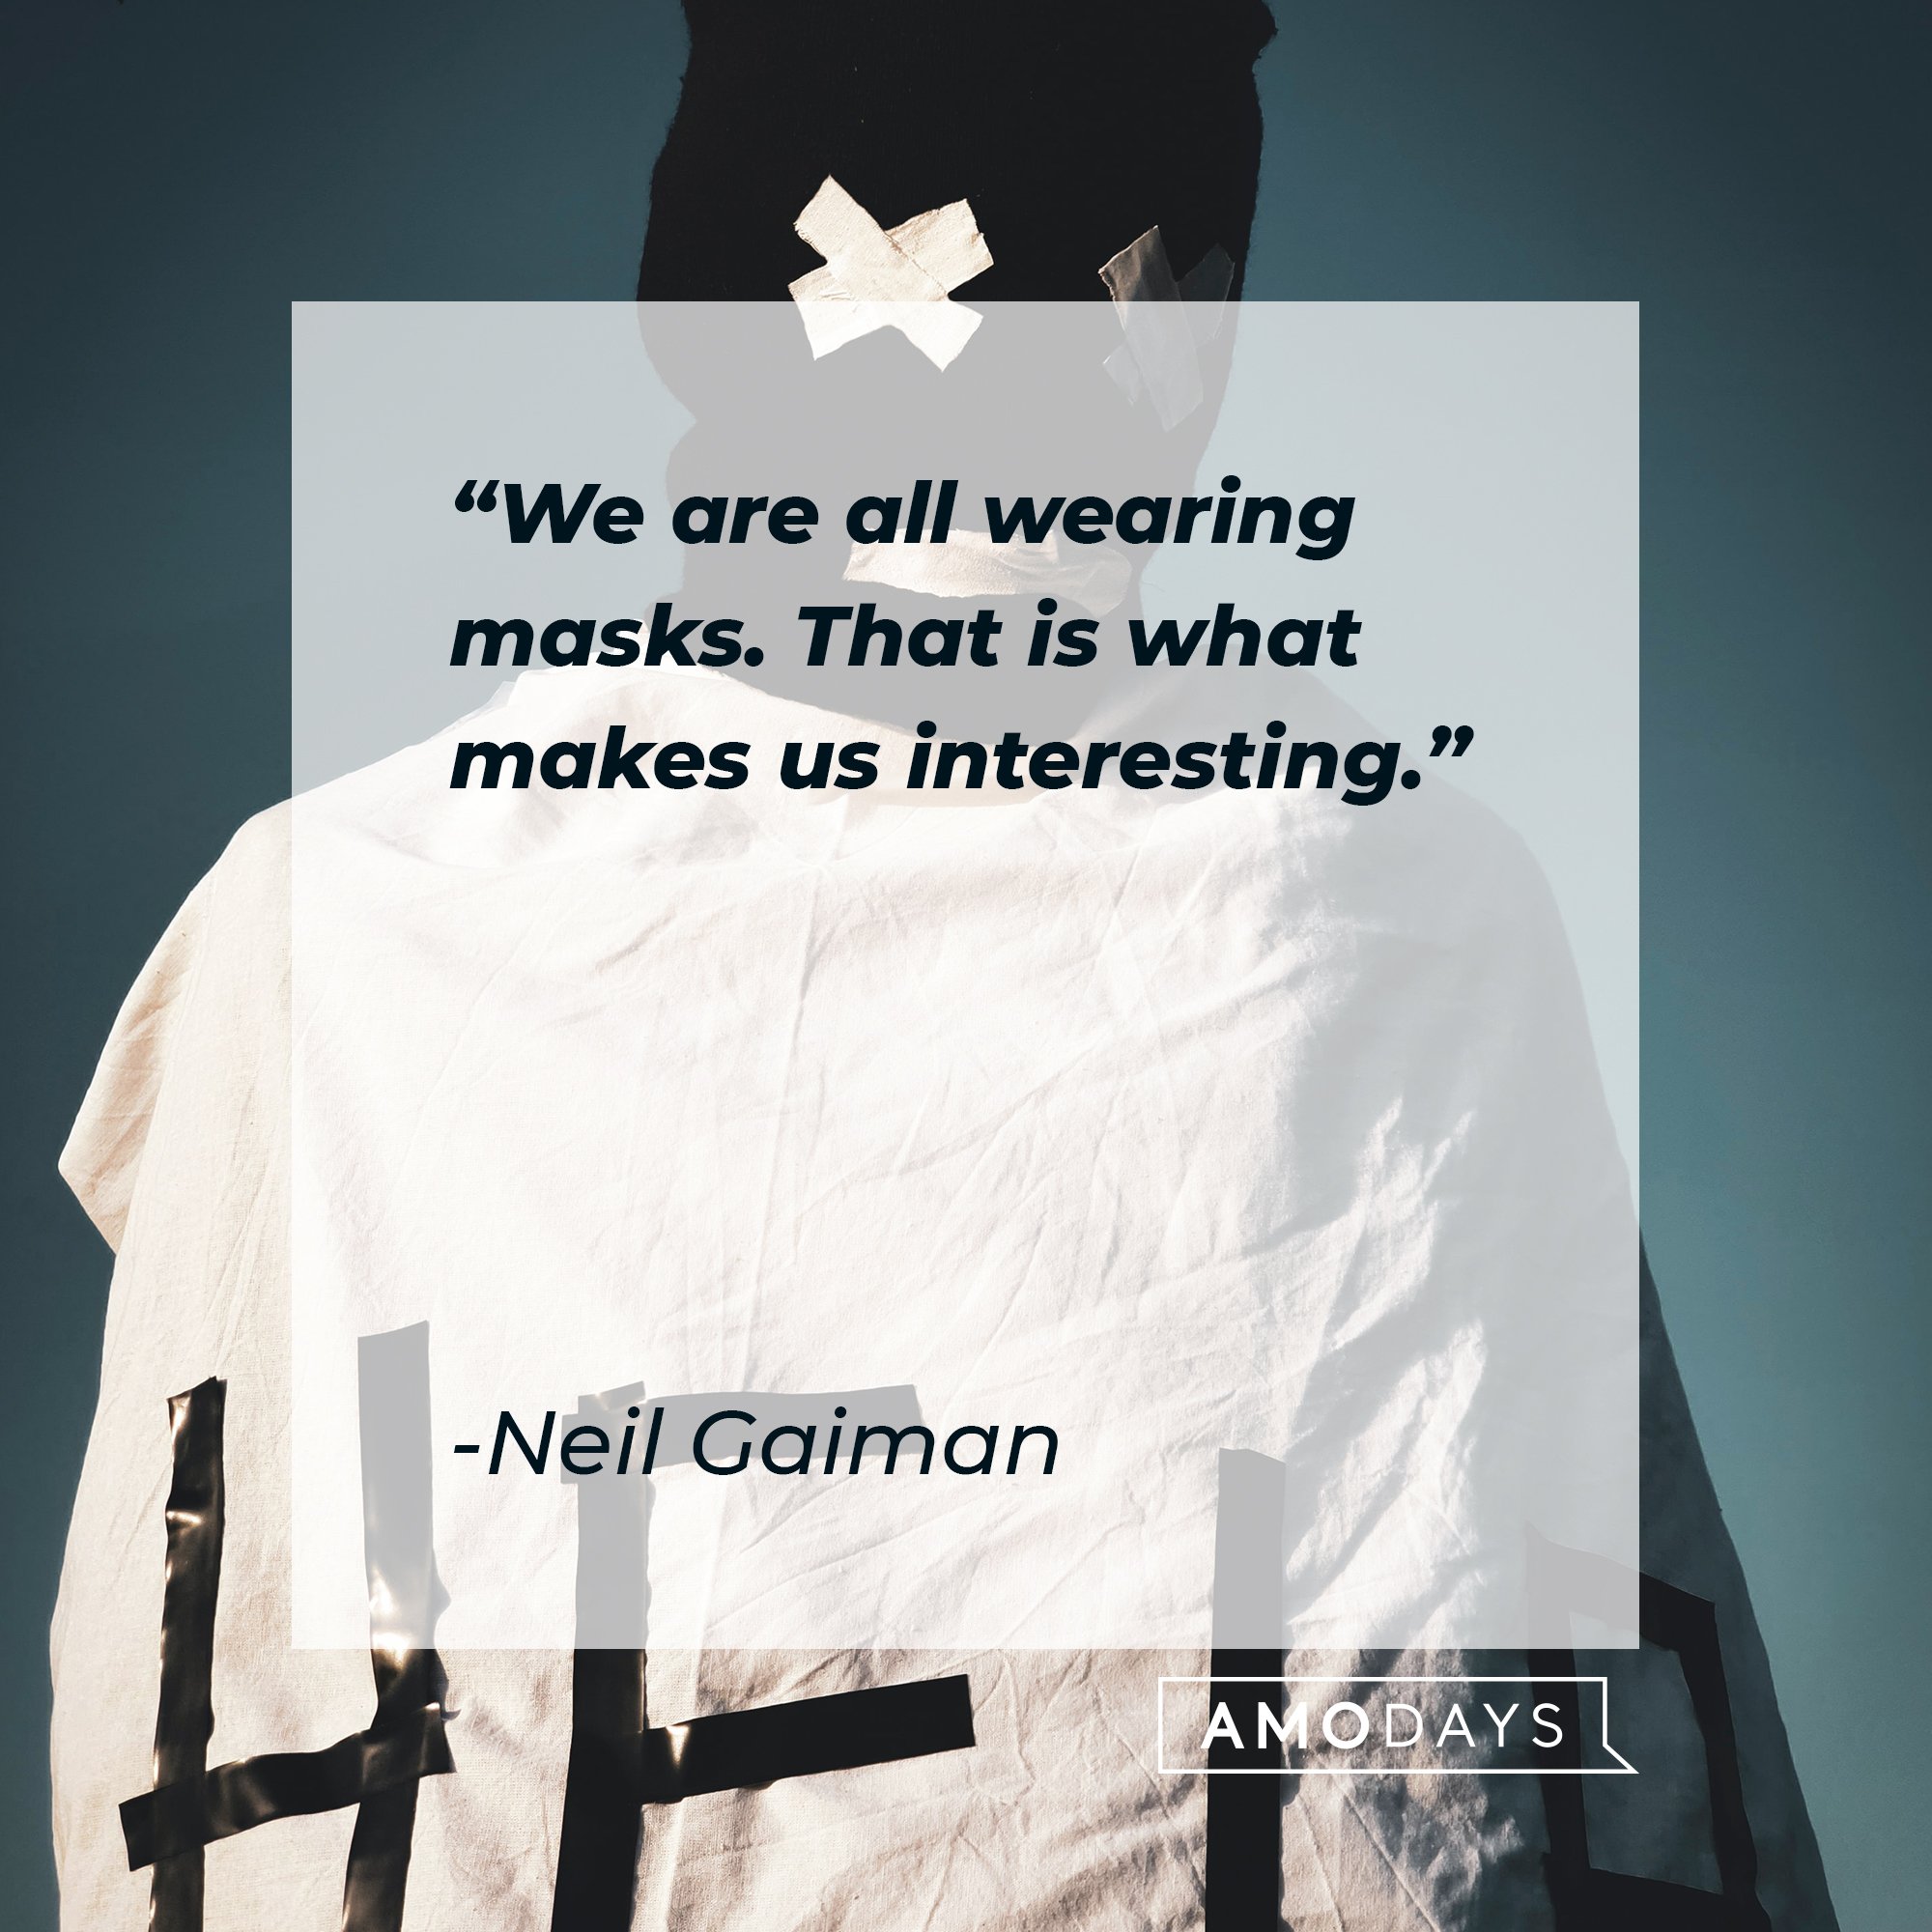 Neil Gaiman's quote: "We are all wearing masks. That is what makes us interesting." | Image: AmoDays